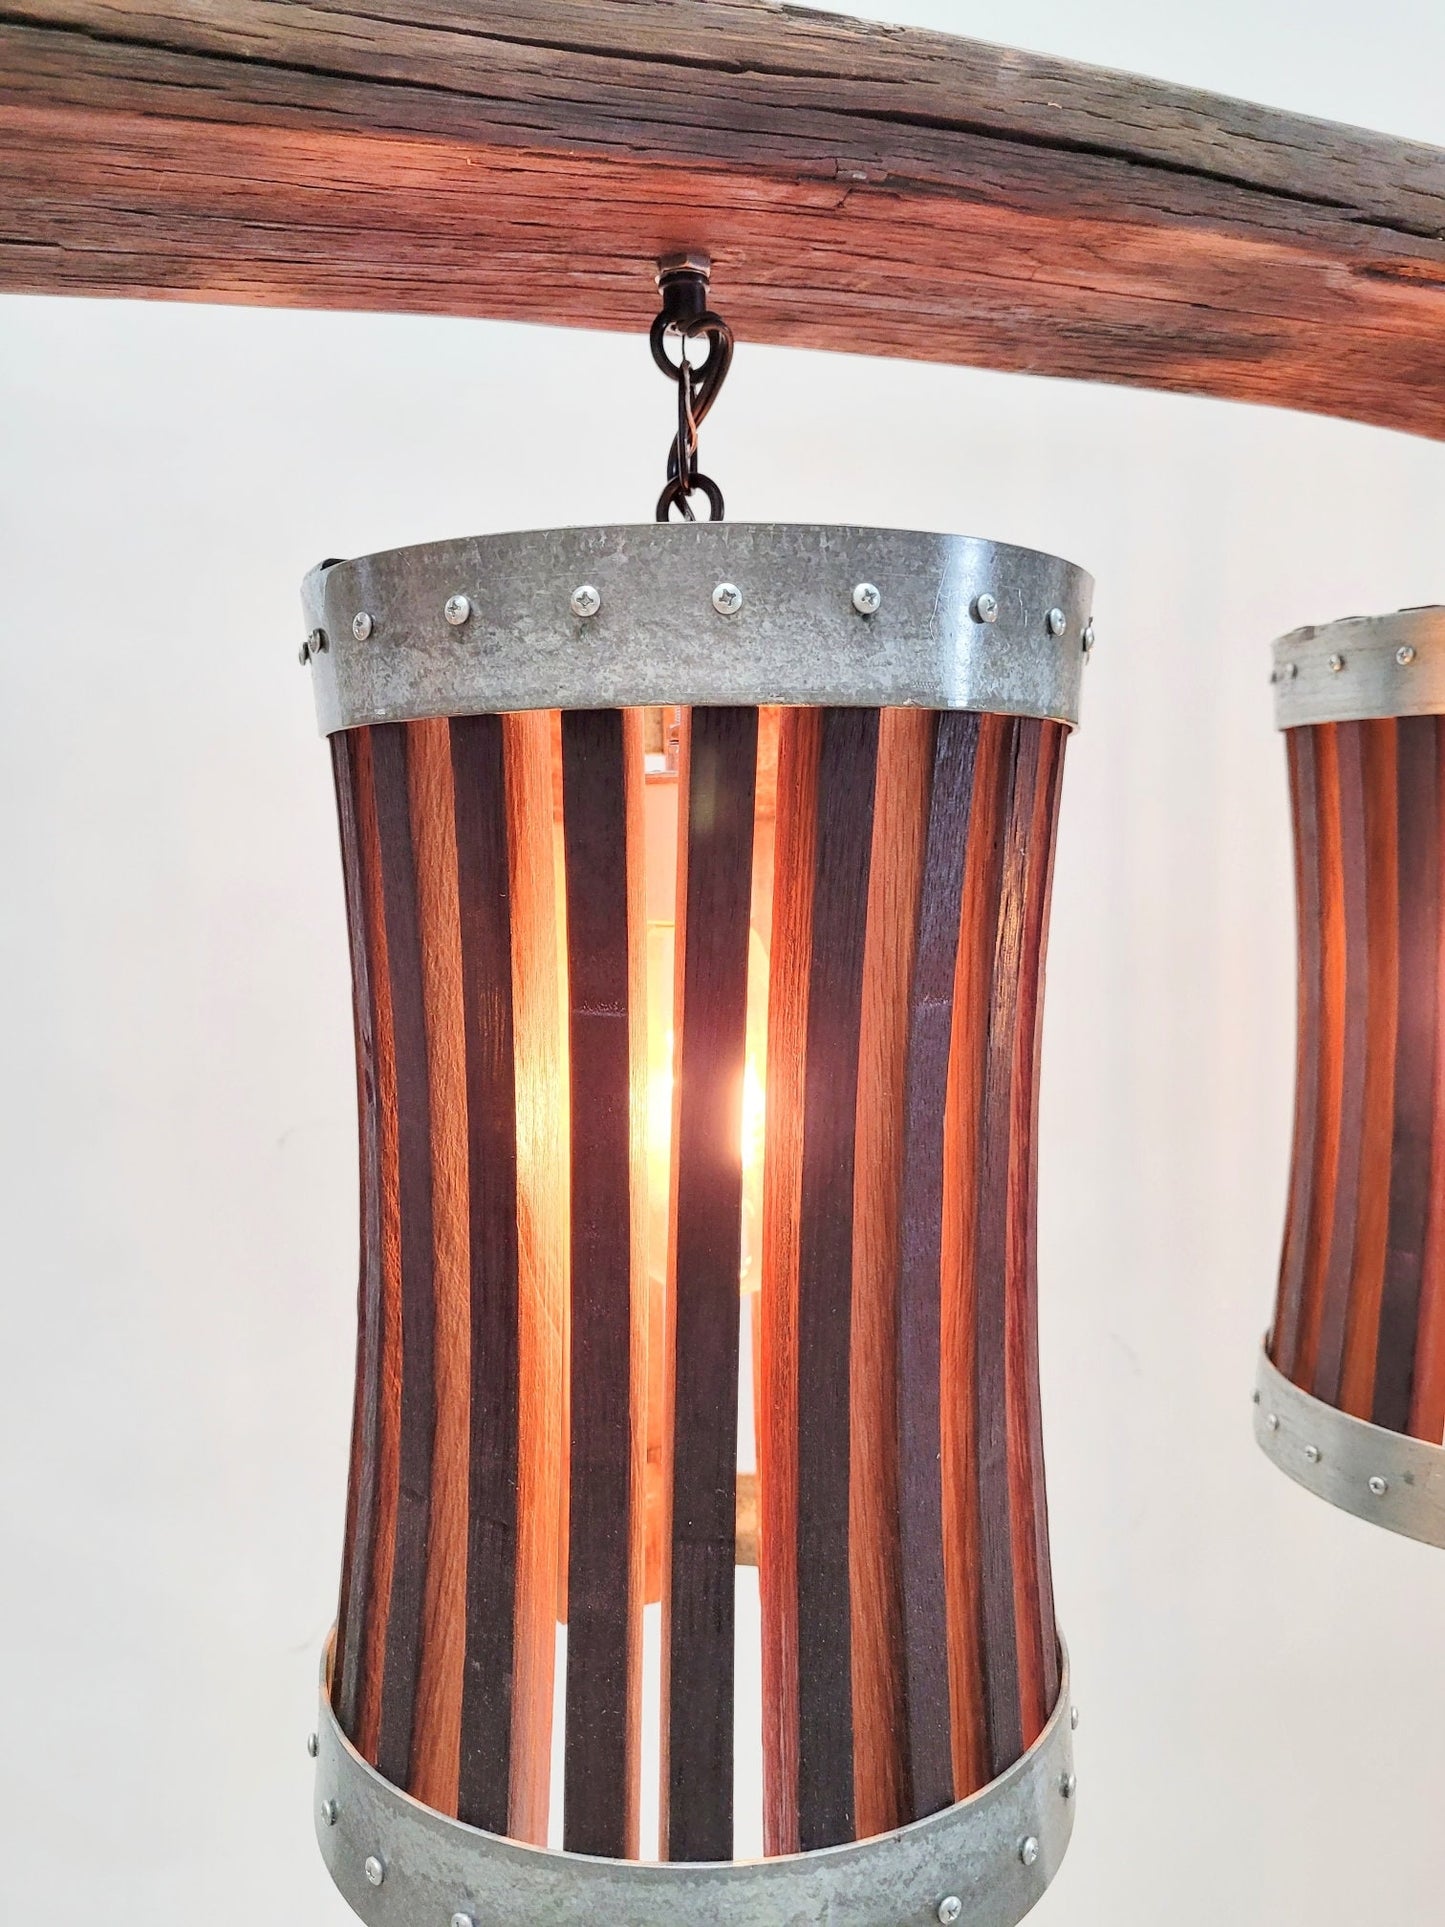 Wine Barrel Chandelier - Sambreel - Made from retired California Wine Barrels + Rings. 100% Recycled!